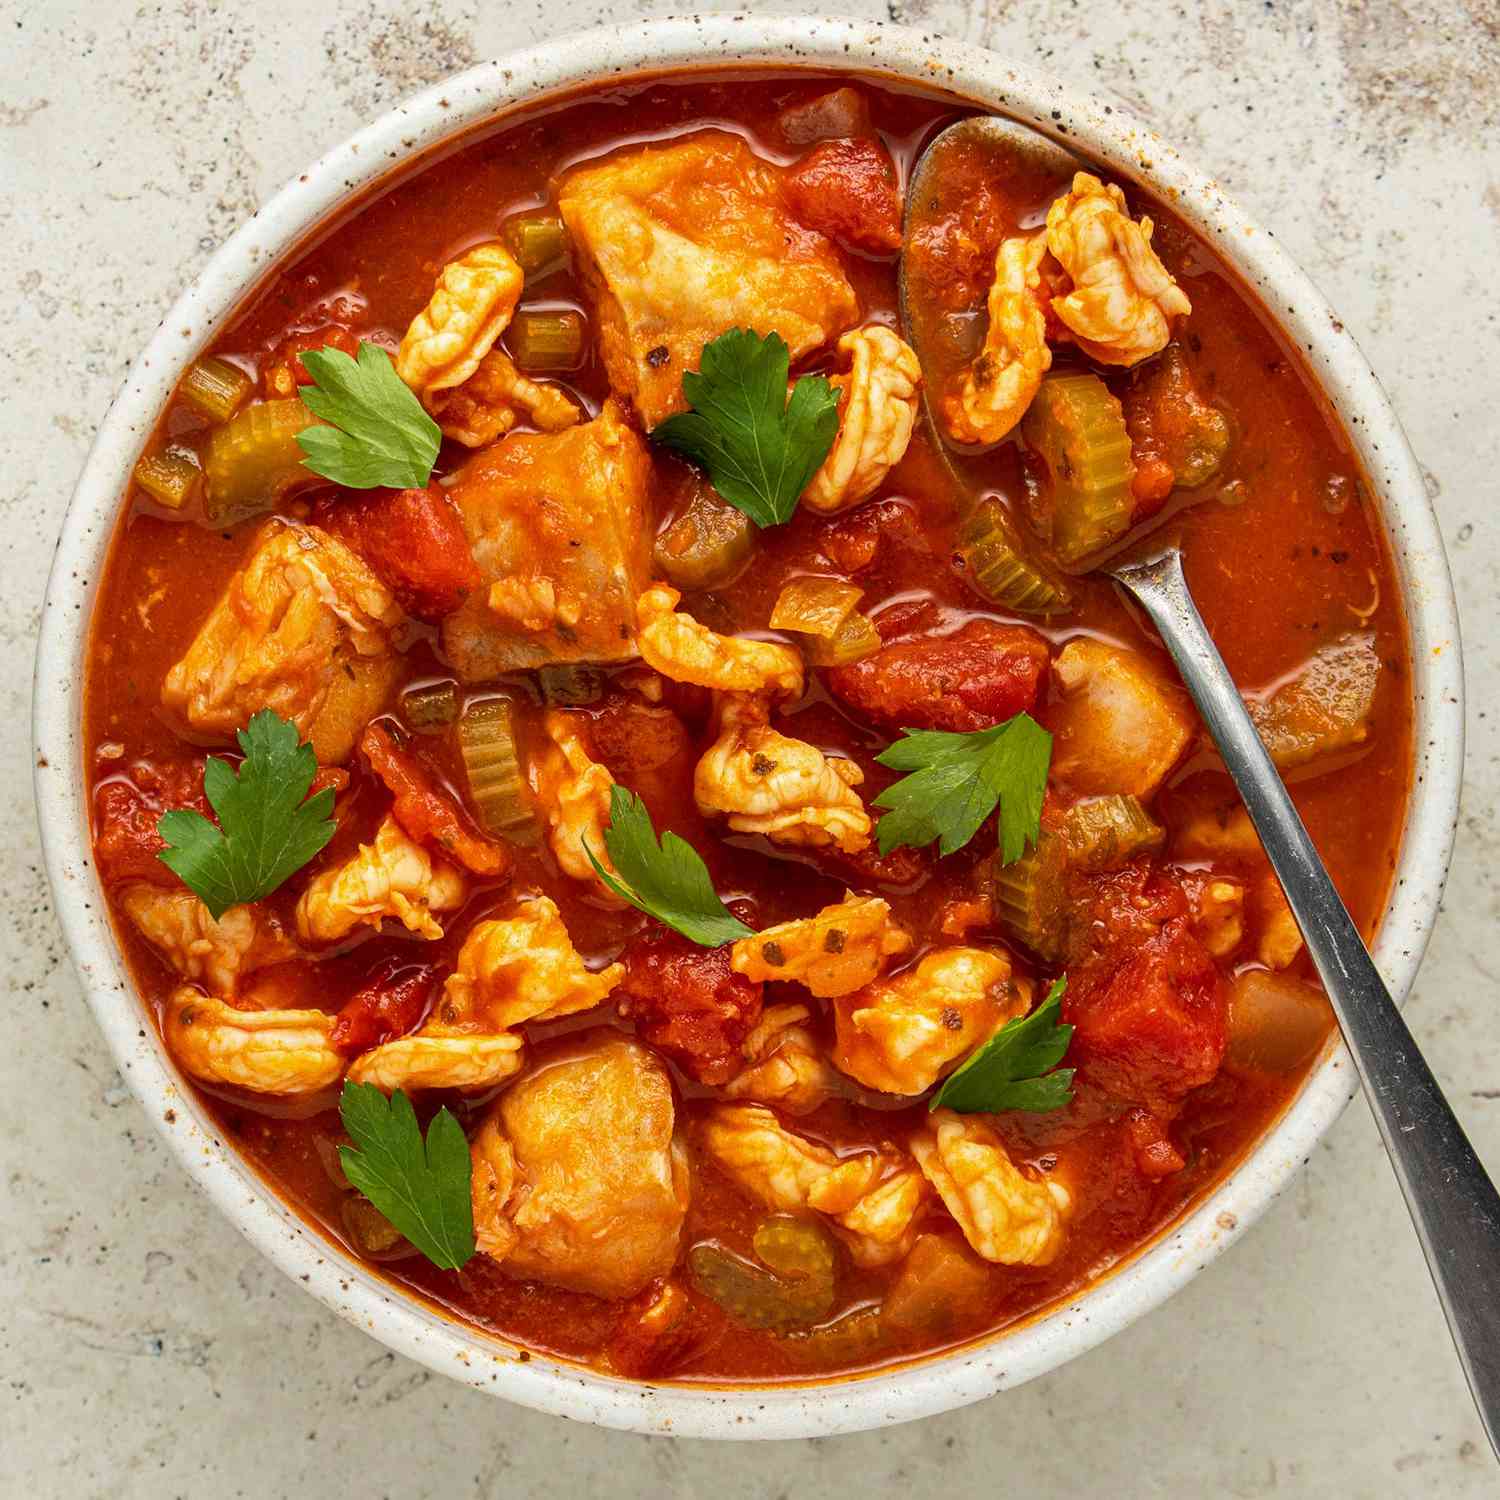 a recipe photo of the Shrimp & Fish Stew served in a bowl